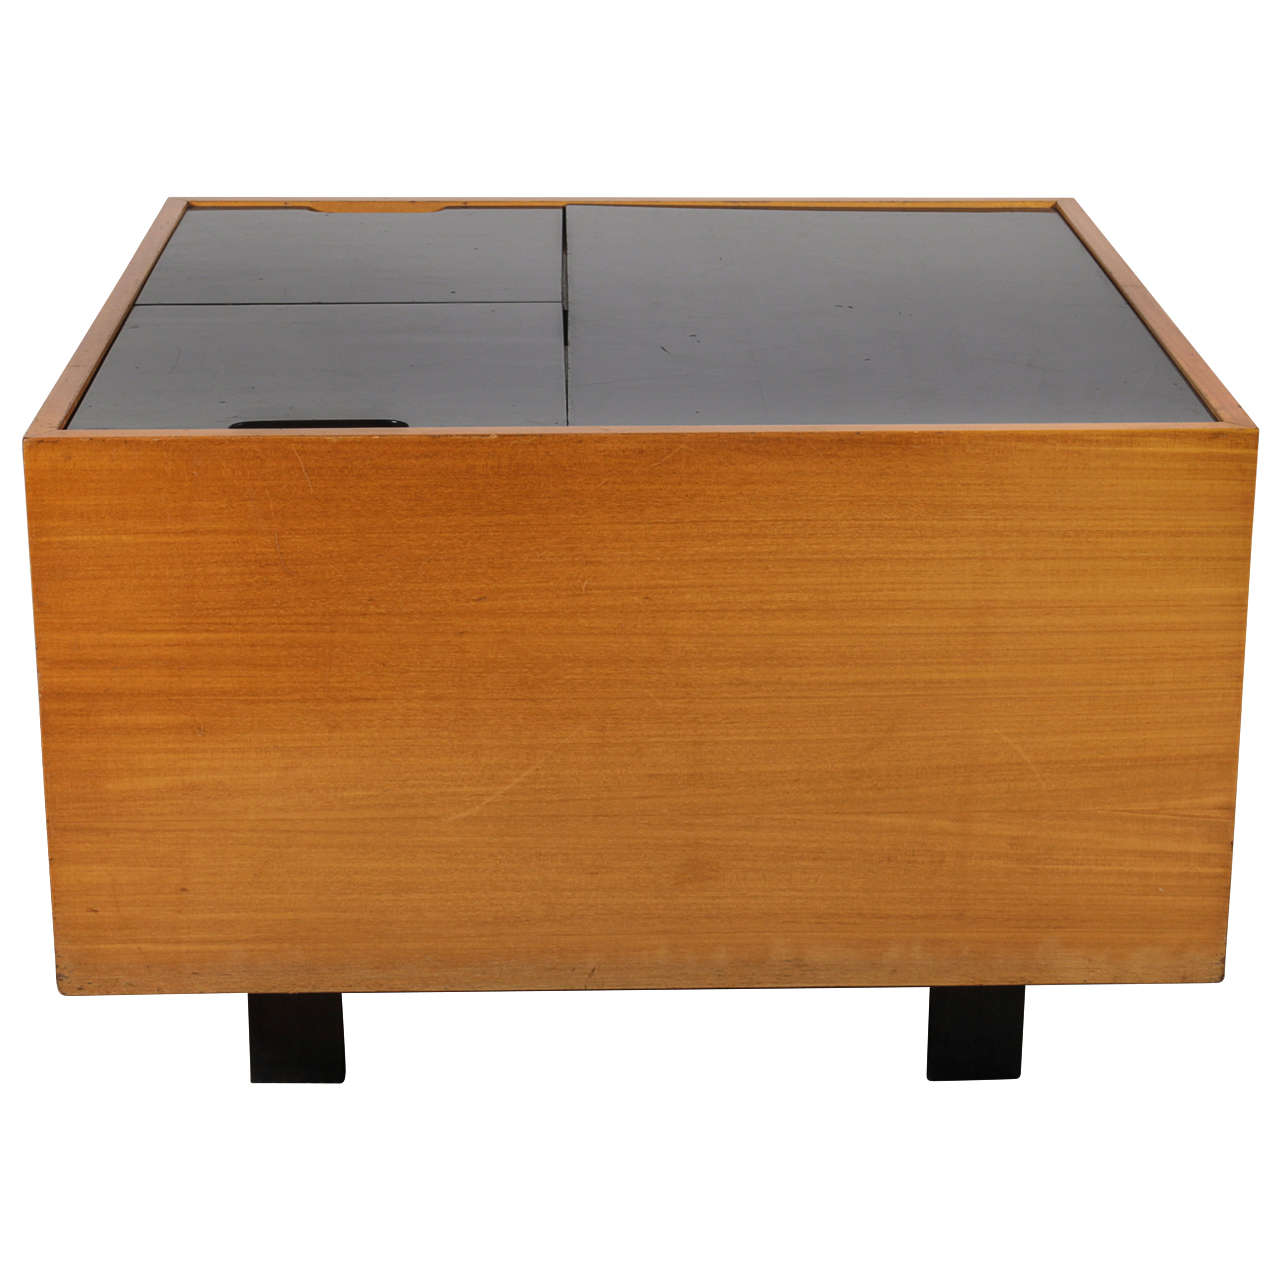 George Nelson Storage Cube, Manufactured by Herman Miller